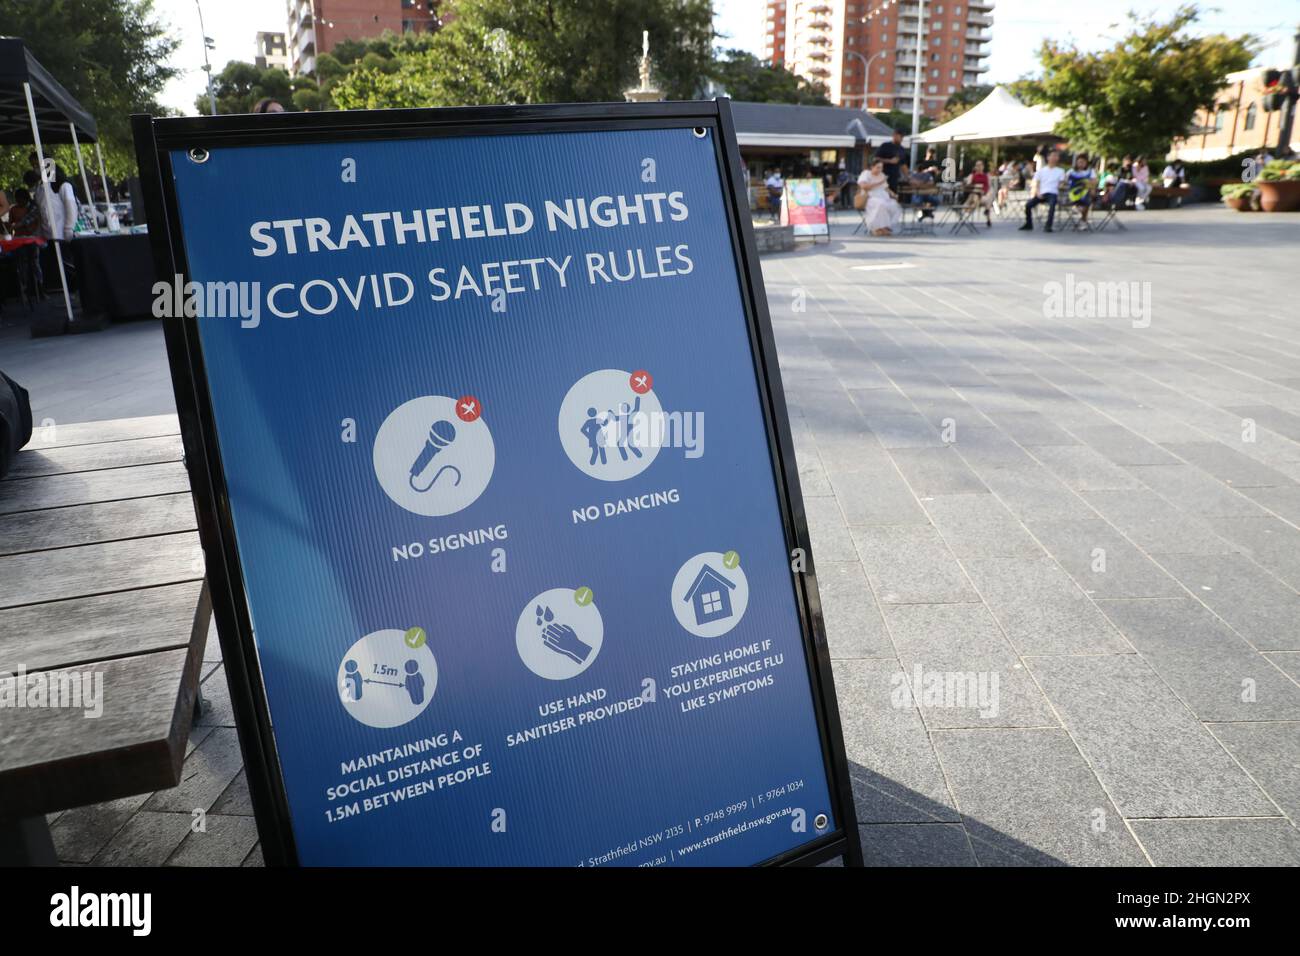 Sydney, Australia. 22nd January 2022. Singing and dancing is banned at the Strathfield Nights events due to draconian laws made by the NSW government. Credit: Richard Milnes/Alamy Live News Stock Photo